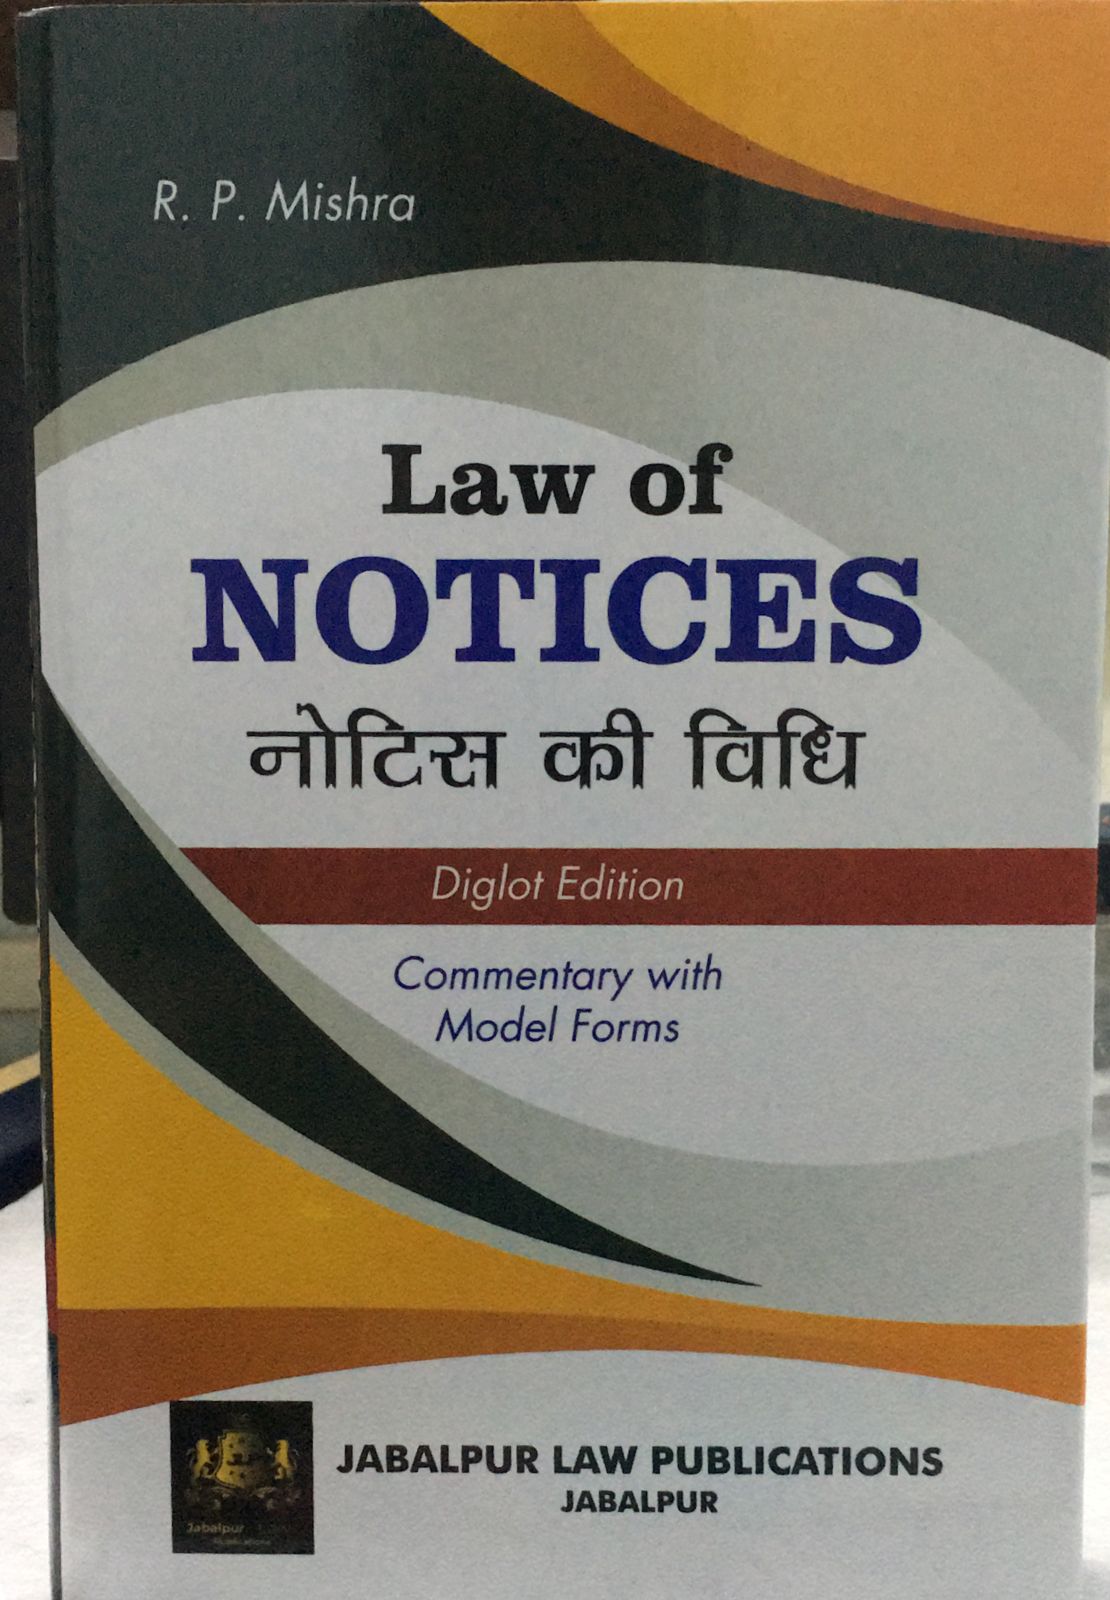 LAW OF NOTICES R P MISHRA JABALPUR LAW PUBLICATION S DIGLOT EDITION COMMENTARY WITH MODEL FORMS